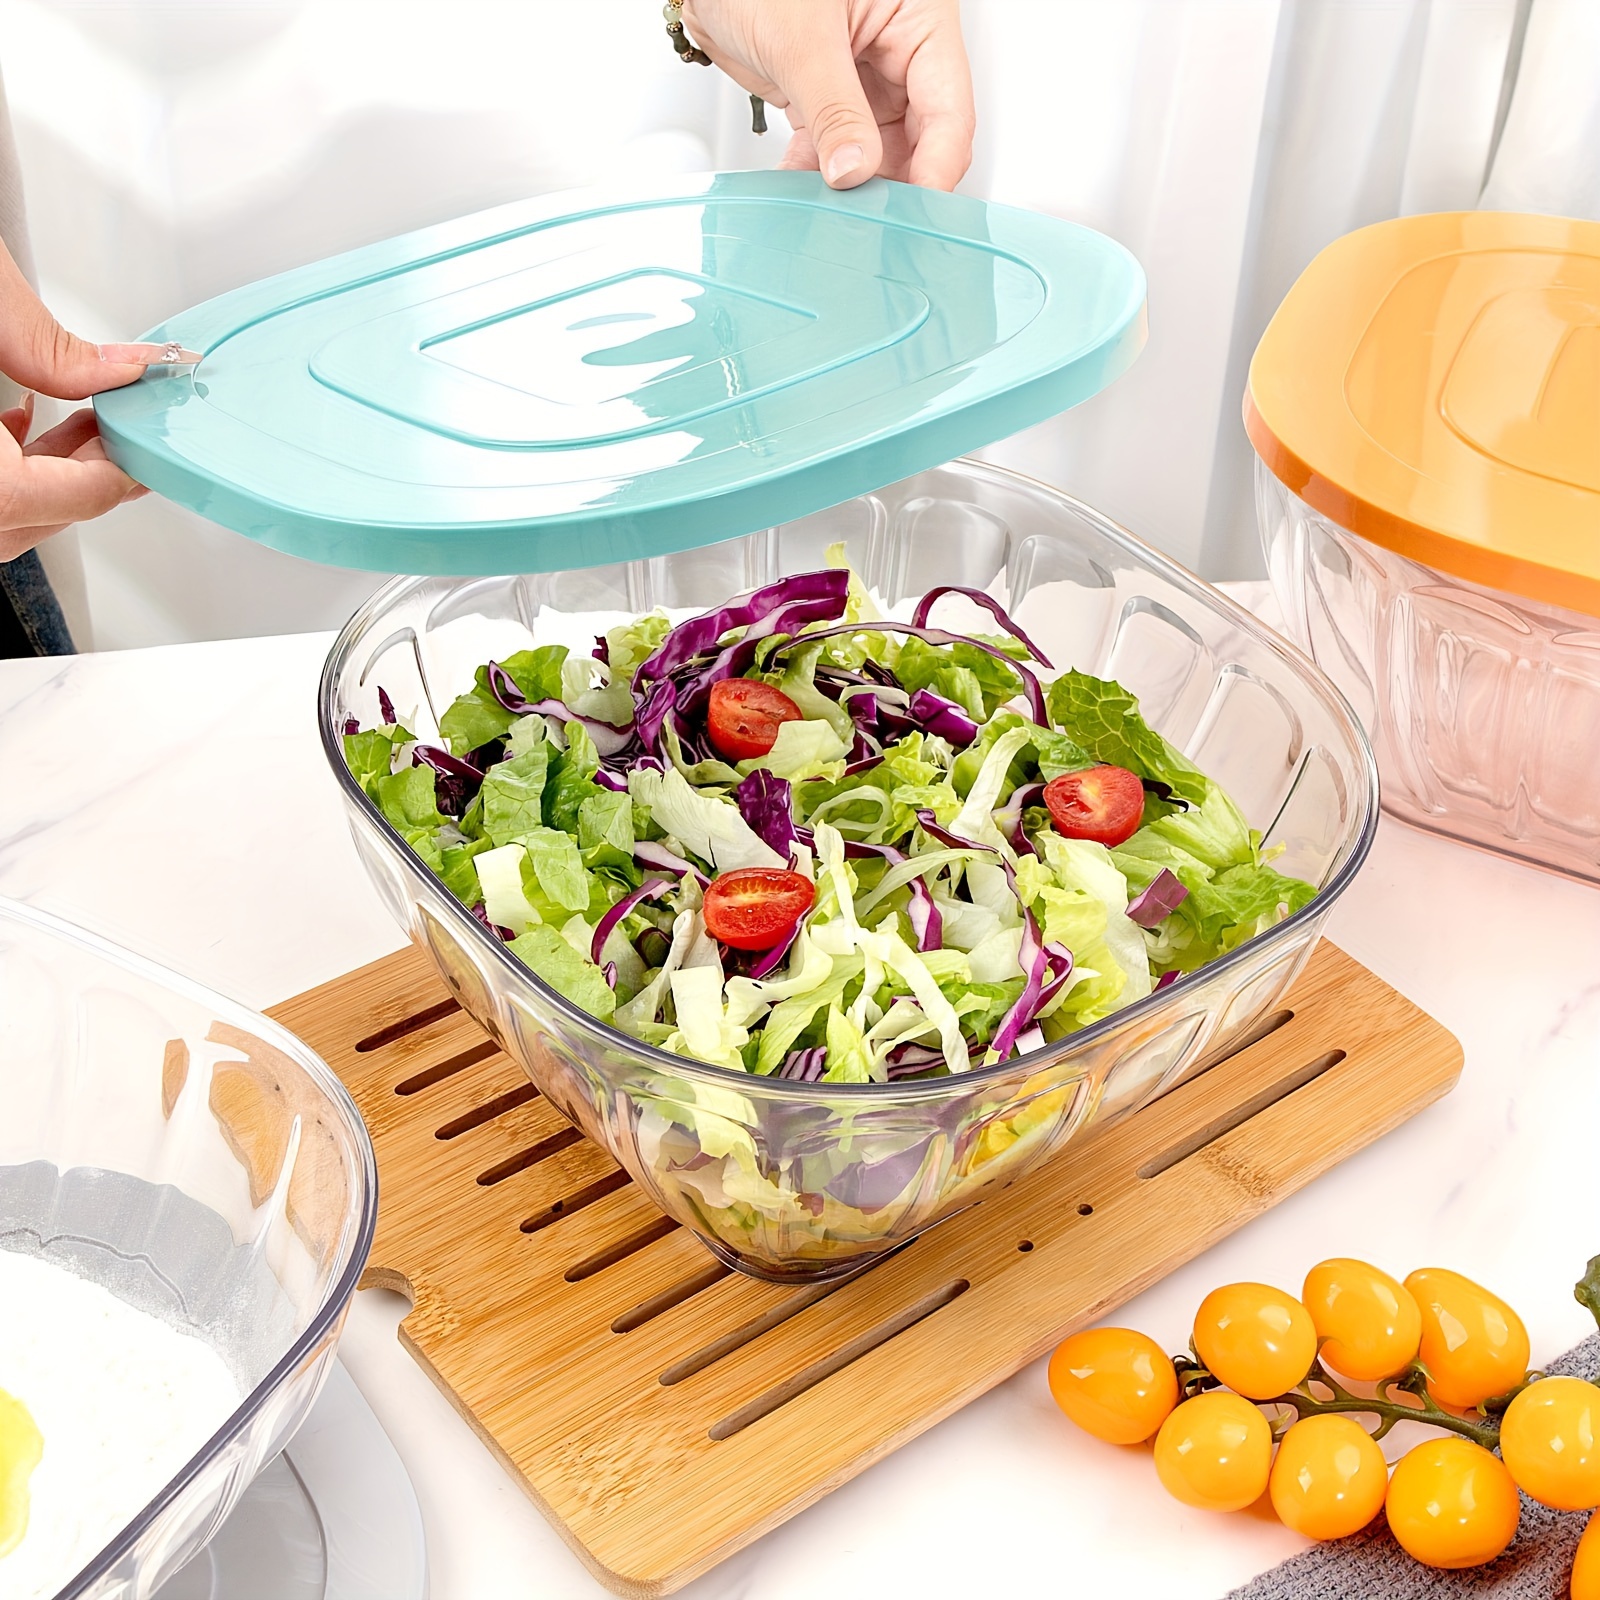 Stainless Steel Mixing Bowls with Airtight Lids, for Cooking, Baking &  Storage